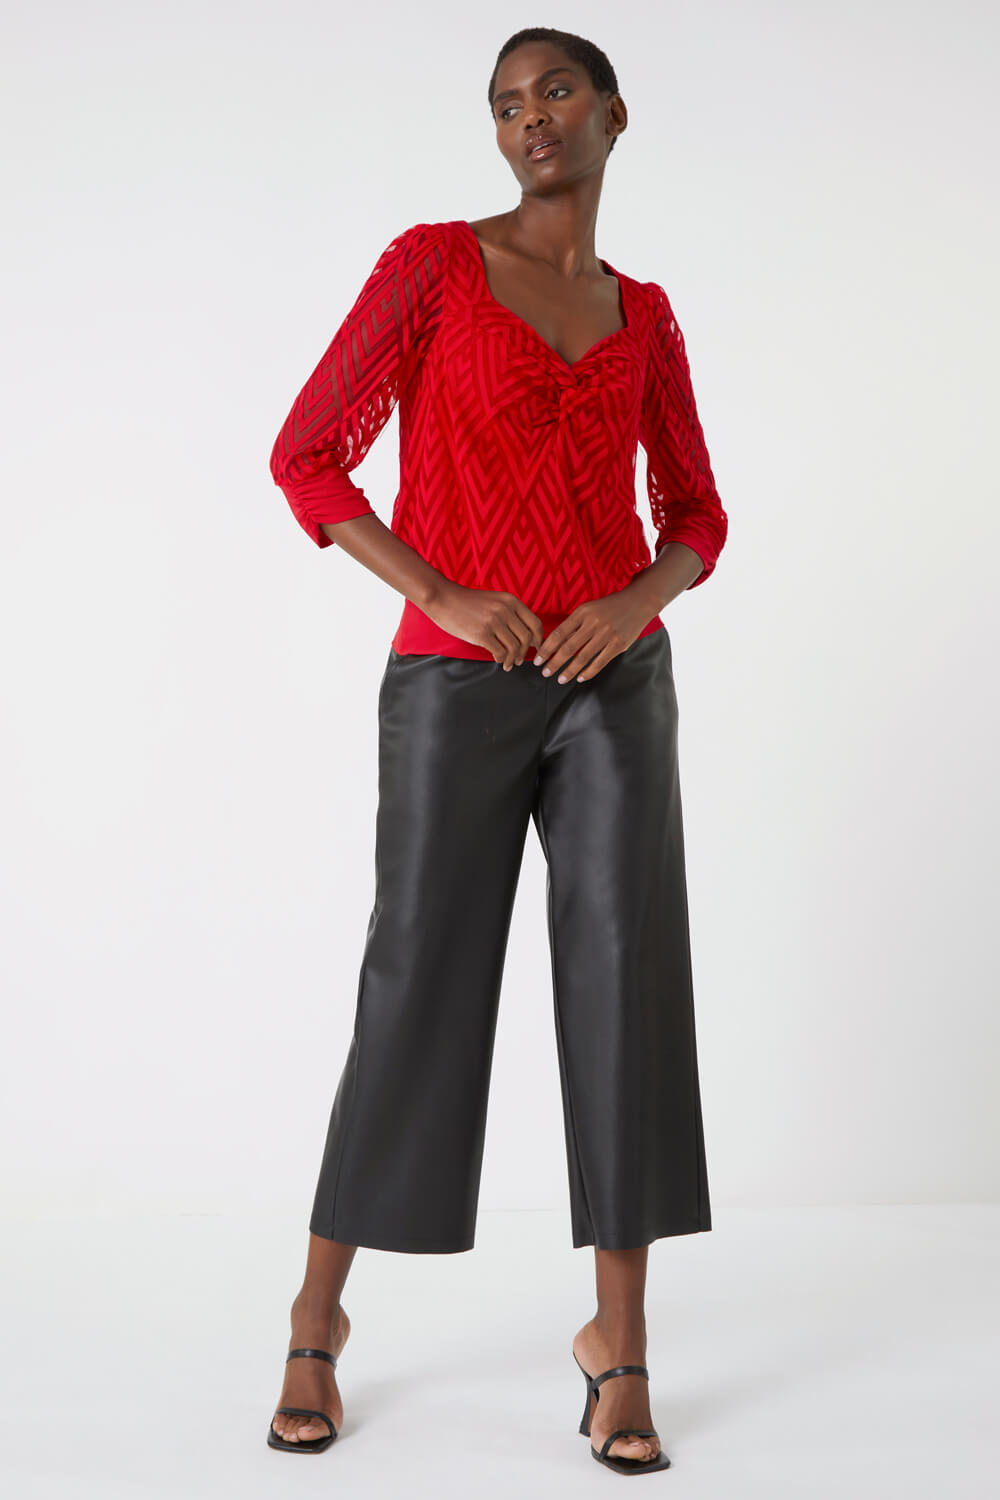 Red Chevron Twist Front Blouson Stretch Top, Image 2 of 5